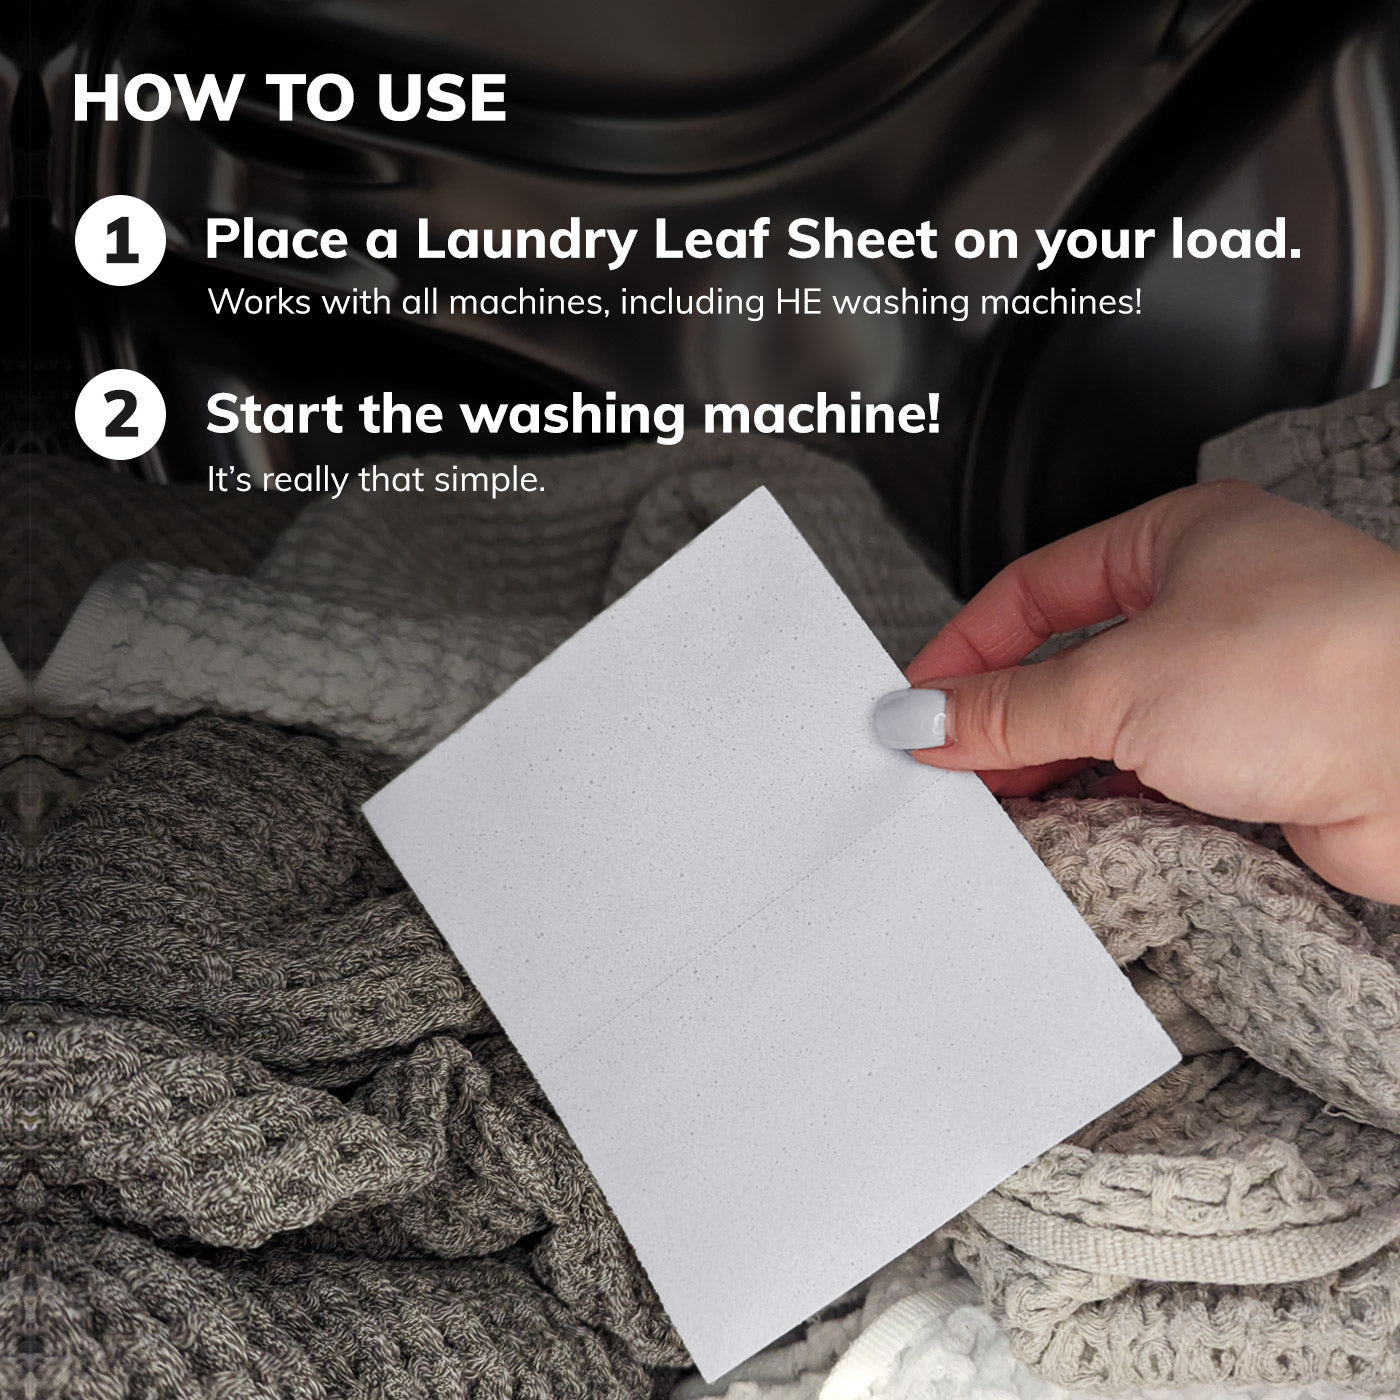 How to use Laundry Leaf in your washing machine with text explanation below